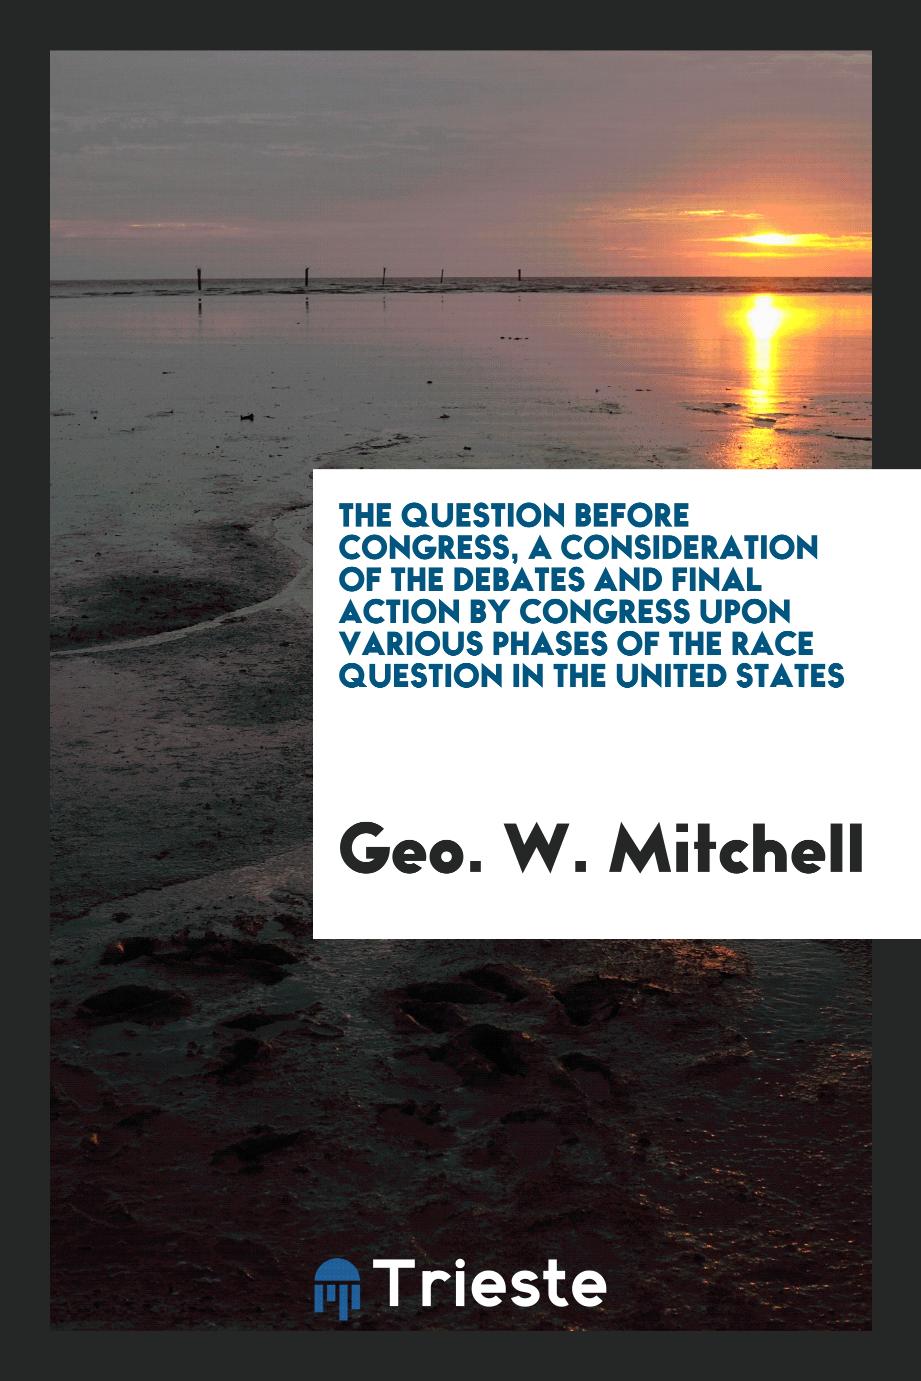 The question before Congress, a consideration of the debates and final action by Congress upon various phases of the race question in the United States